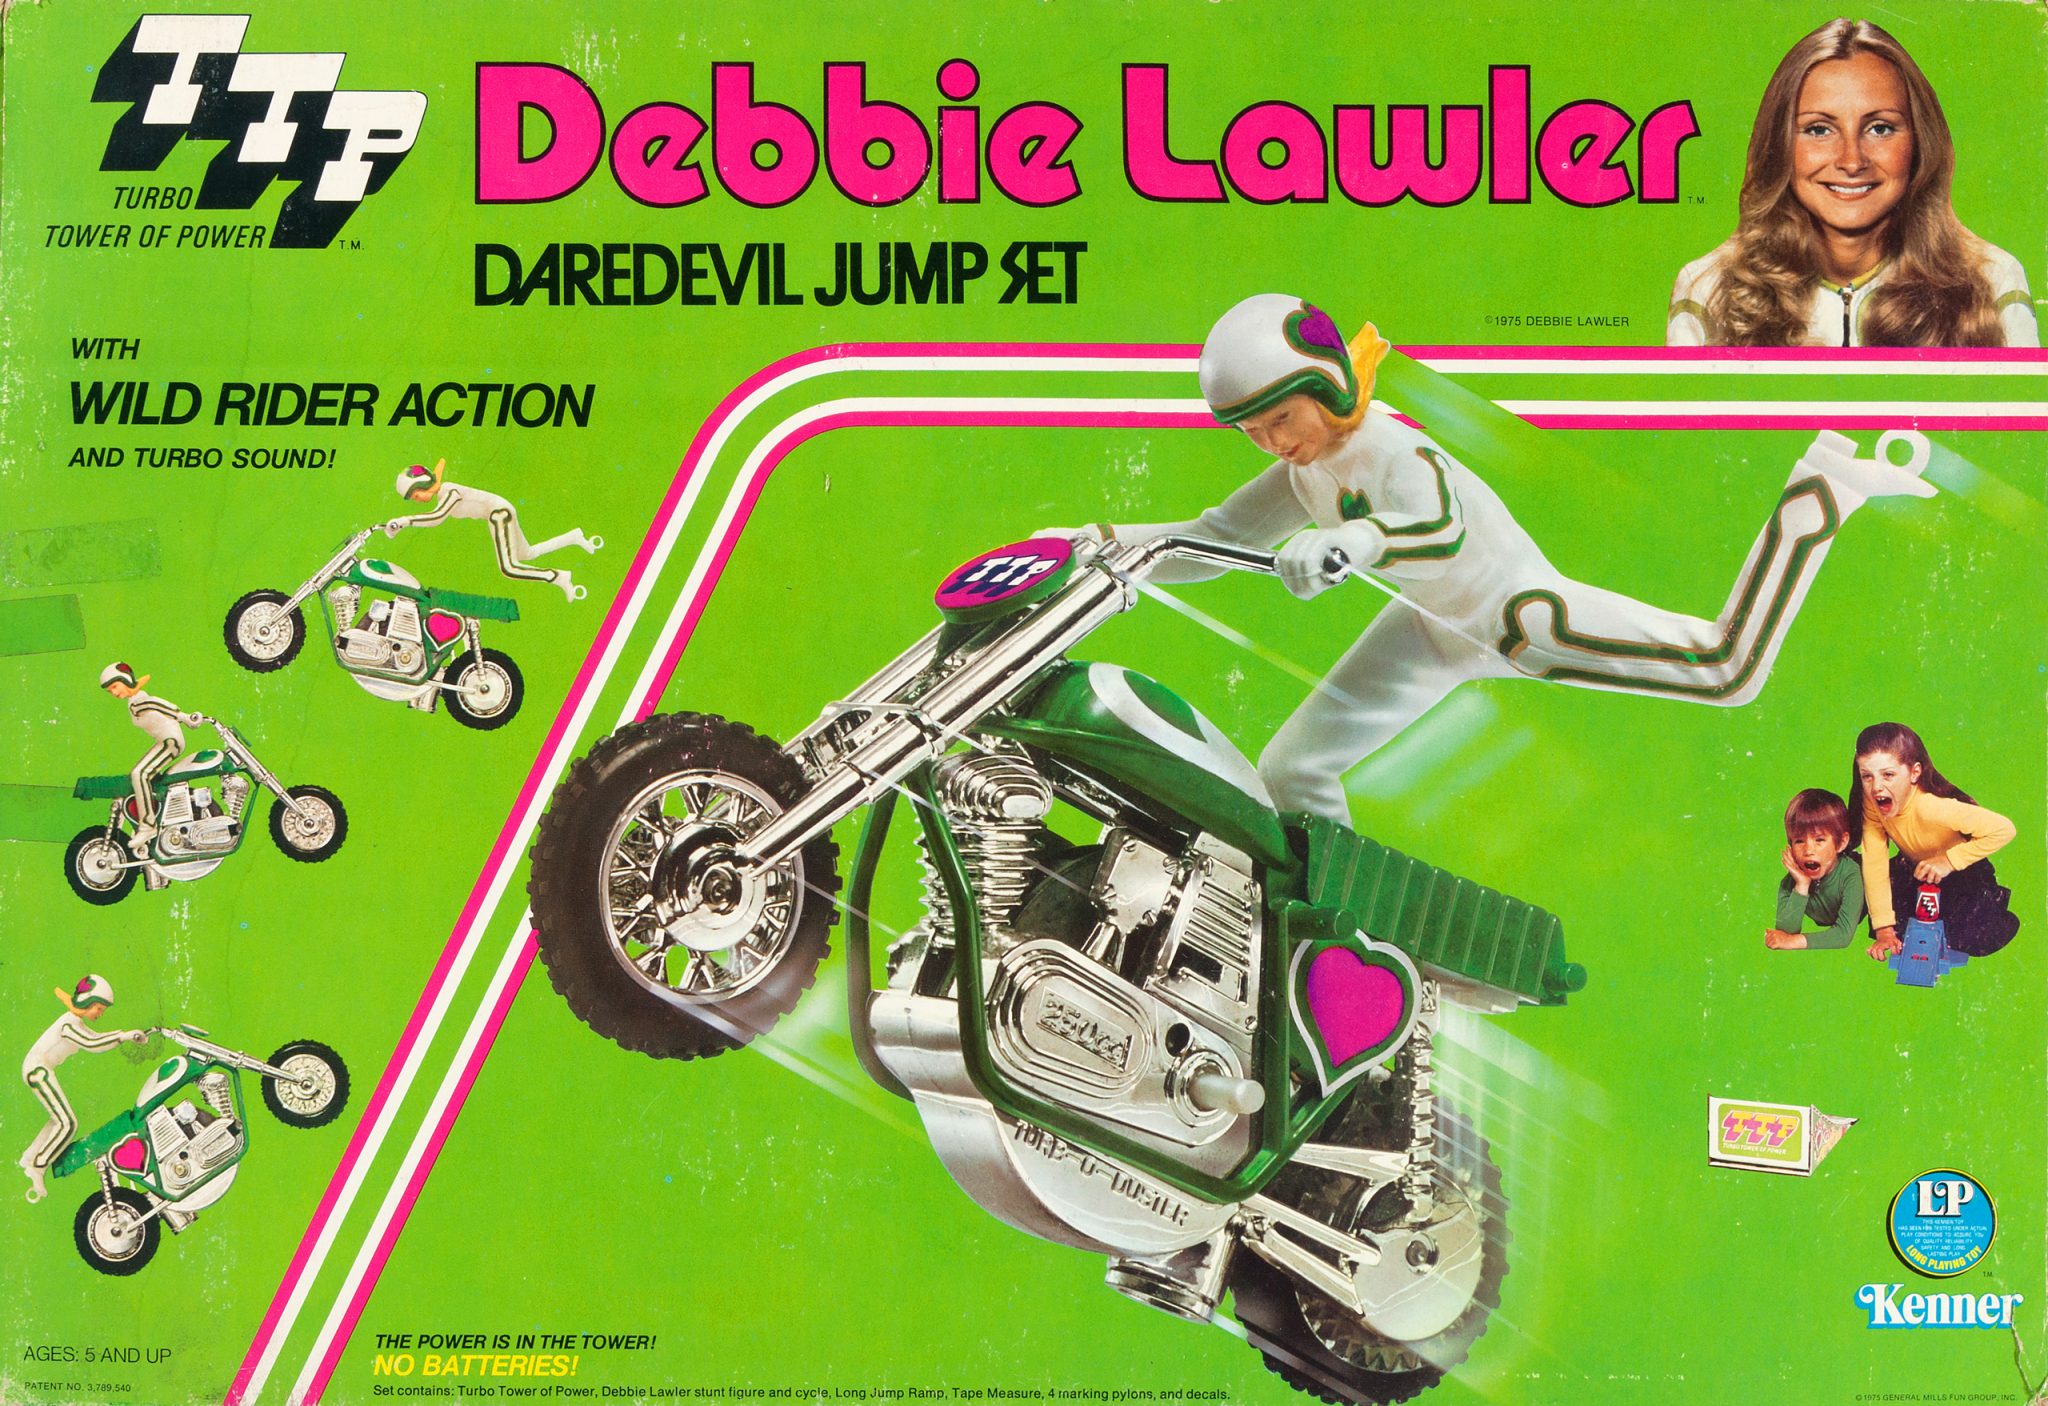 Daredevil Debbie: America’s motorcycle jump queen who took on Knievel and won